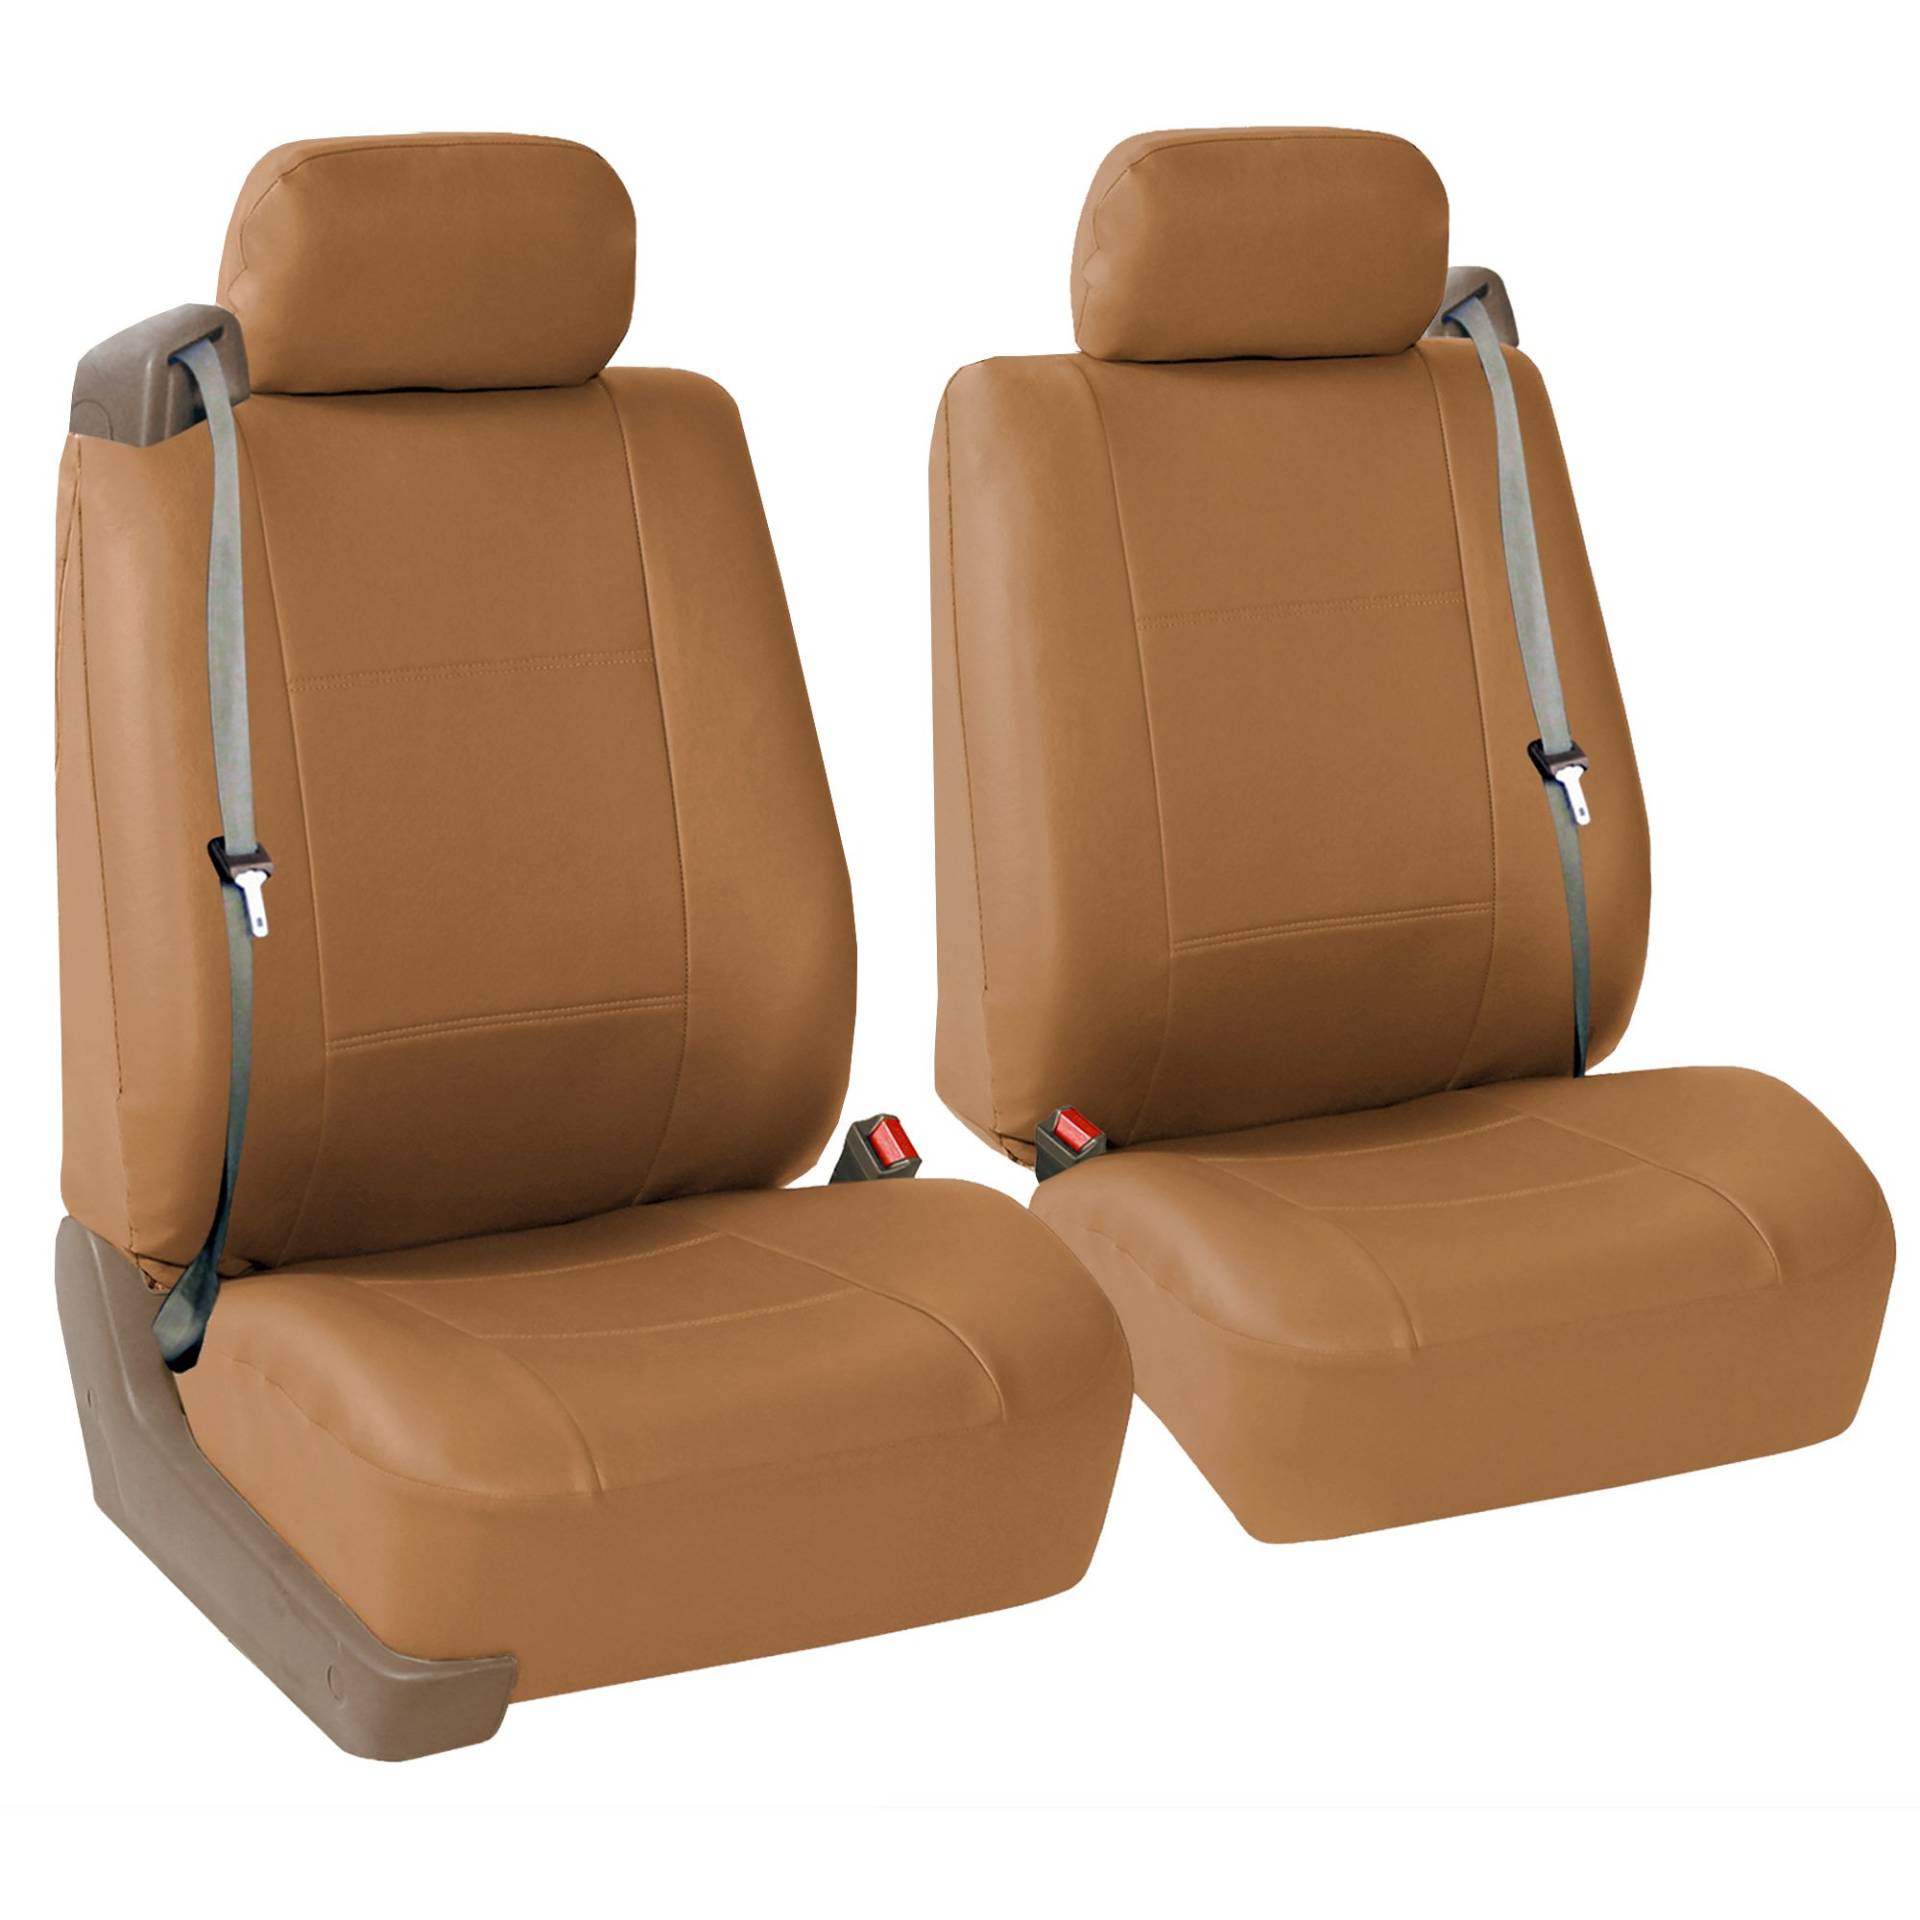 FH GROUP Car Seat Covers Front Set Faux Leather - Car Seat Covers for Low Back Seat with Removable Headrest, Universal Fit, Automotive Seat Covers, Airbag Compatible Car Seat Cover for SUV, Van Tan von FH GROUP